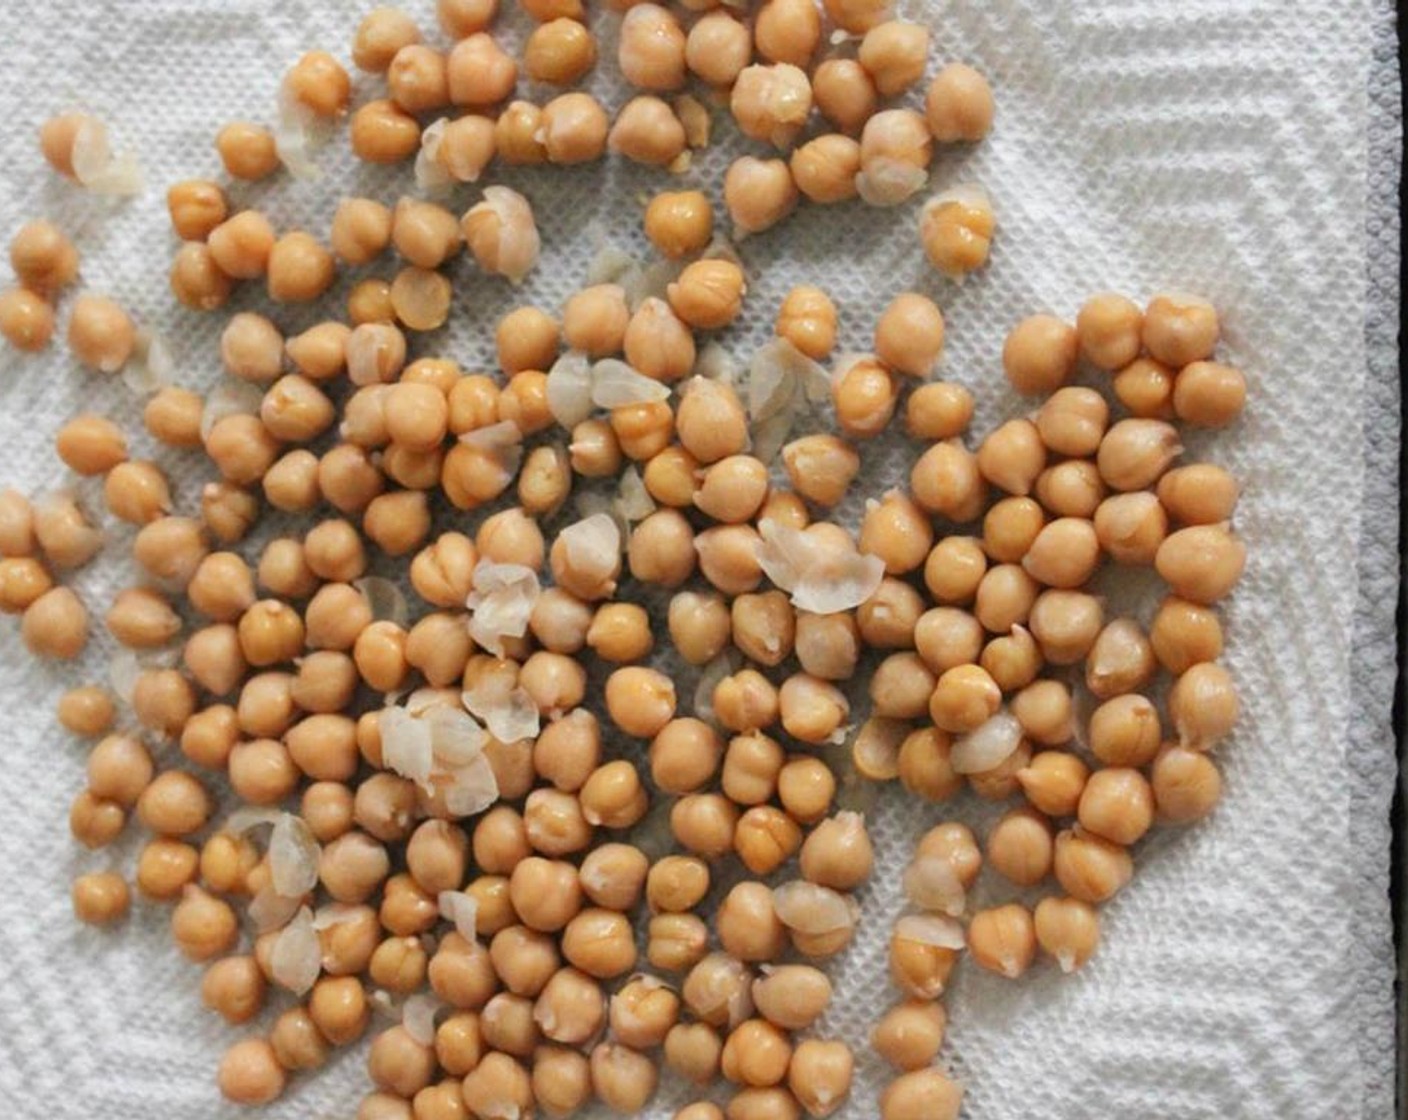 step 2 Drain and rinse the Chickpeas (1 can). Gently pat them dry. When you do this, you’ll notice that some of the 'skins' on the chickpeas will co.e loose. That’s a good thing. Just pick off the loose skins and discard them.